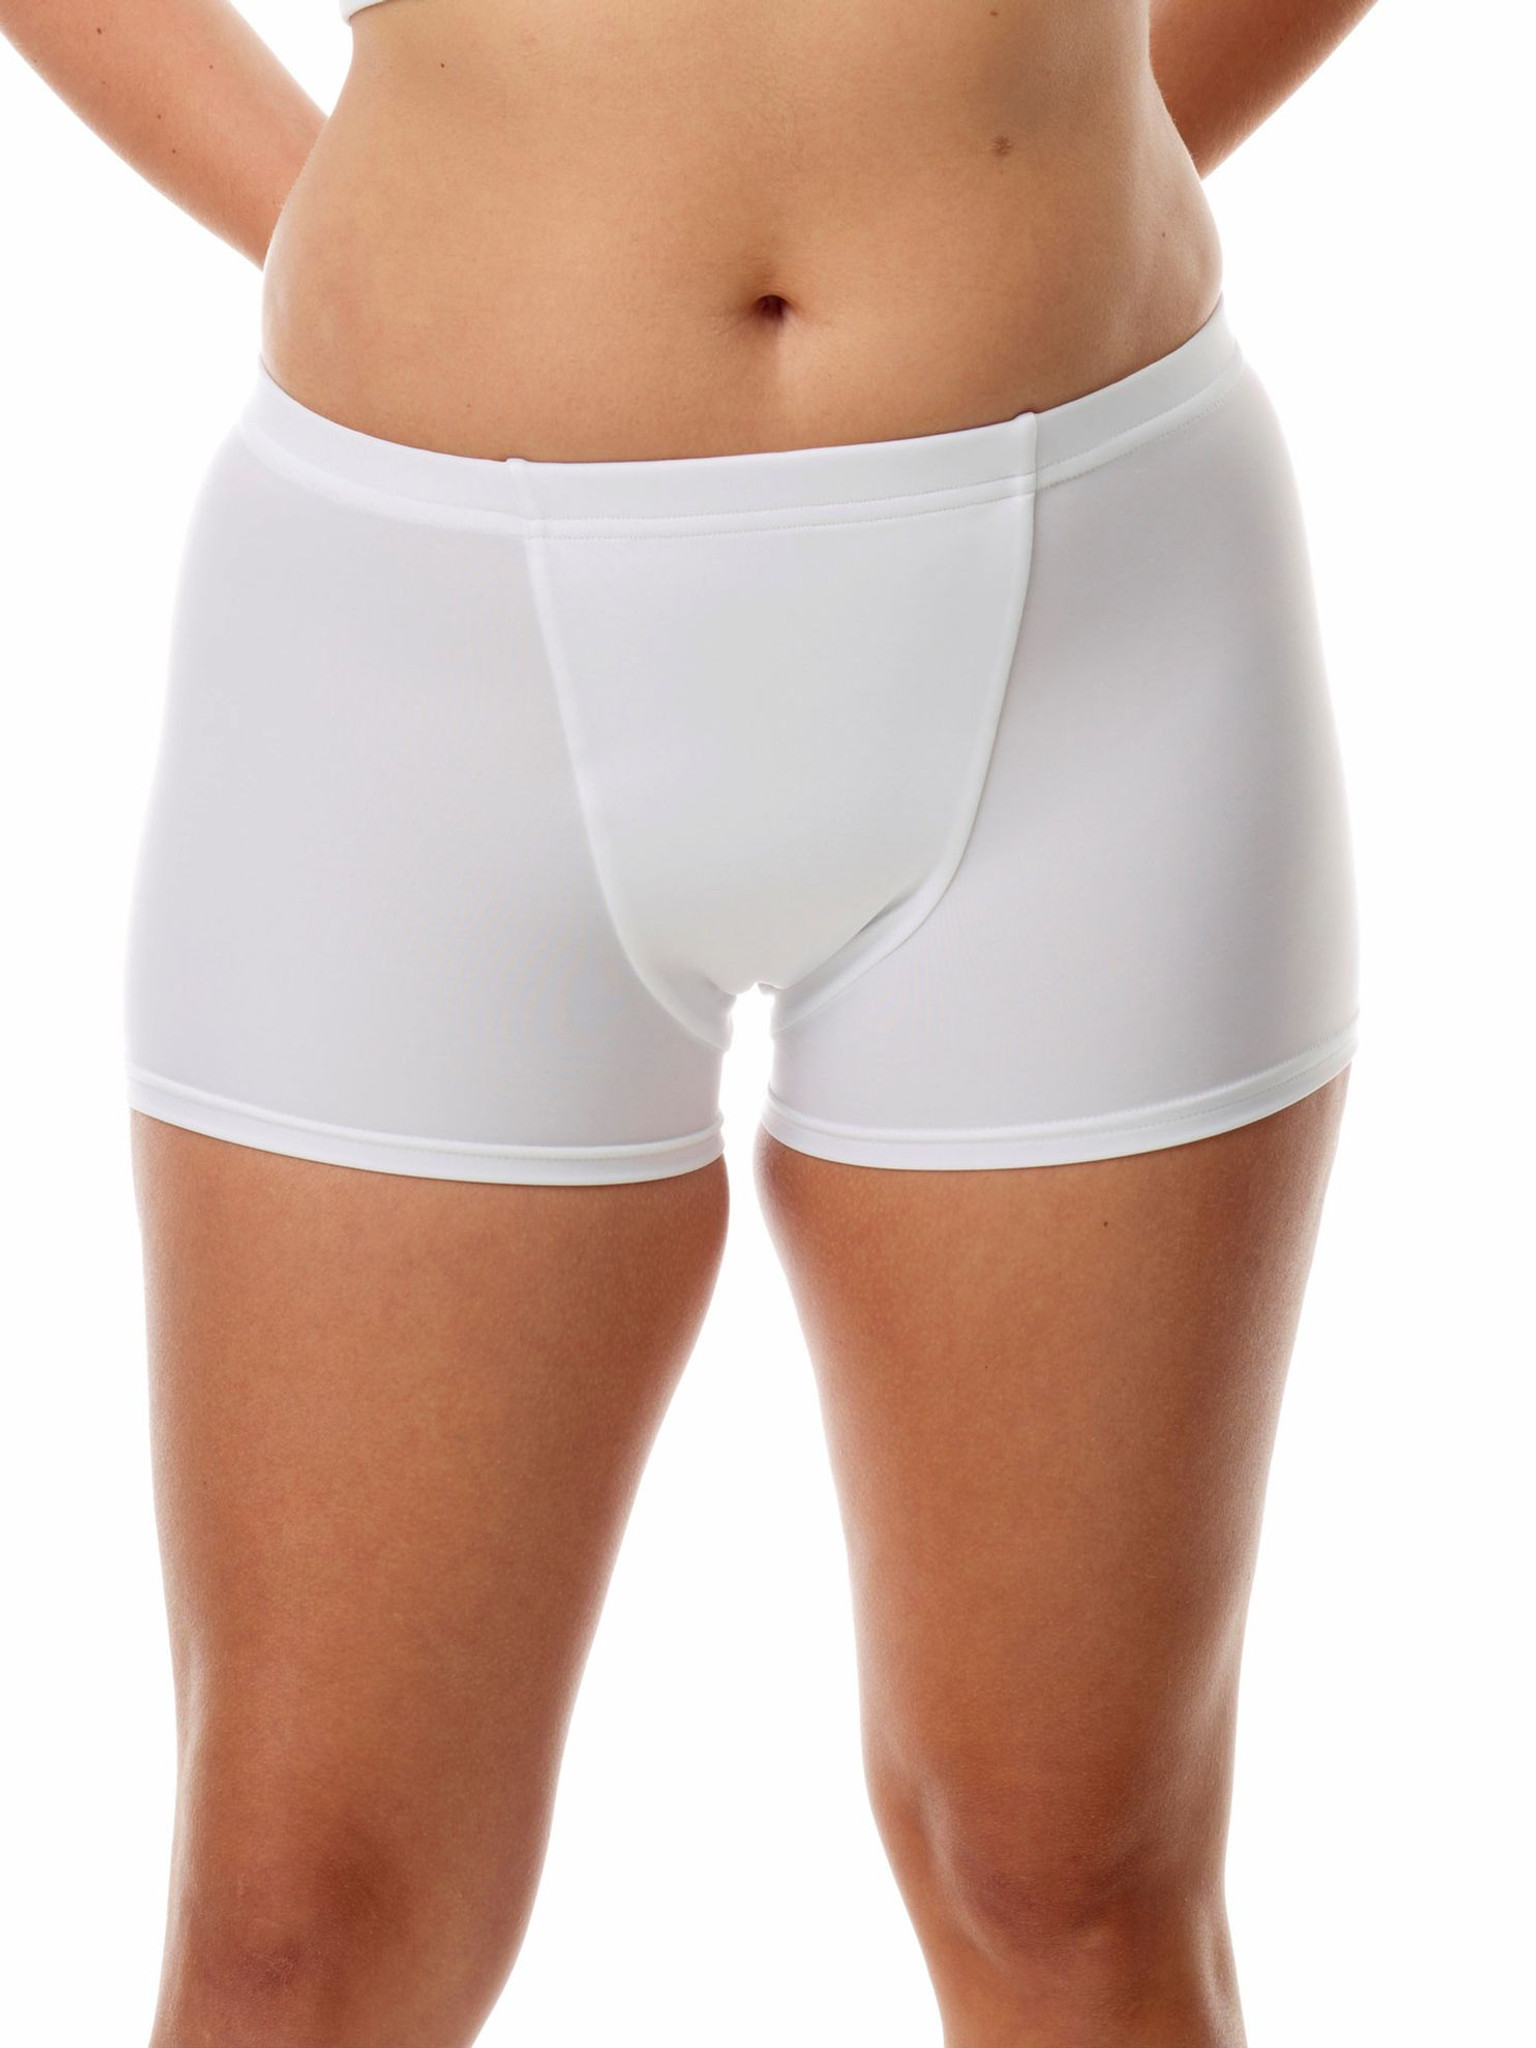 Compression Shorts for Women Multiple Uses , Post Partum, Hernia